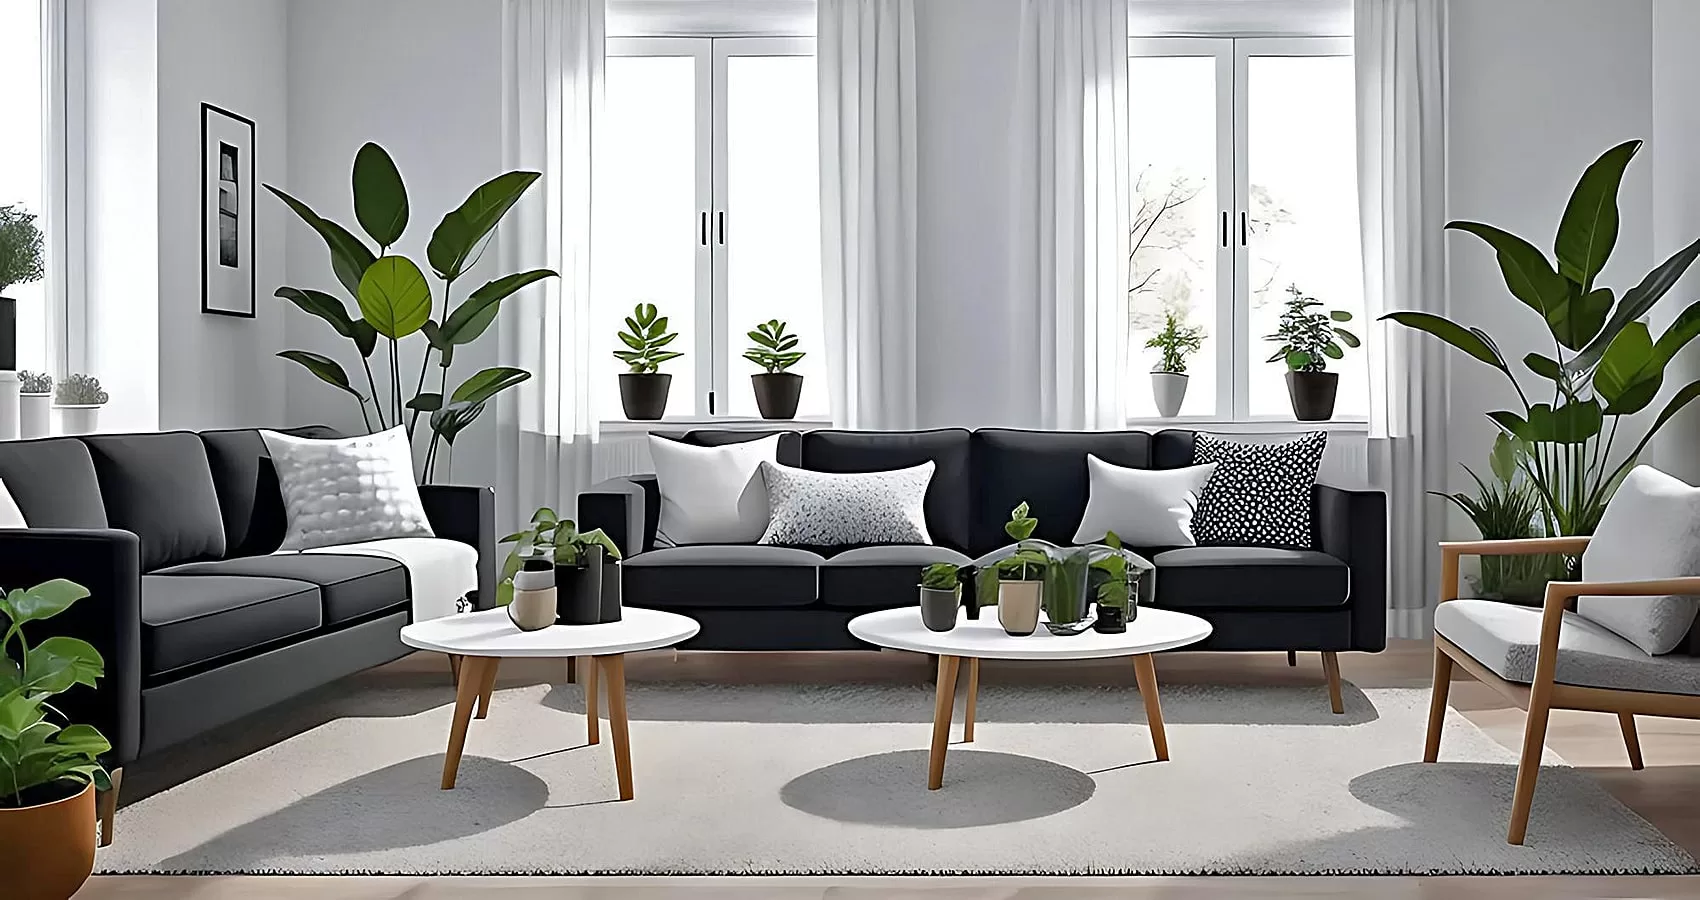 Black and White Living Room | Luxury Black and White Living Room | Black and White Living Room Decor | Black and White Living Room Ideas